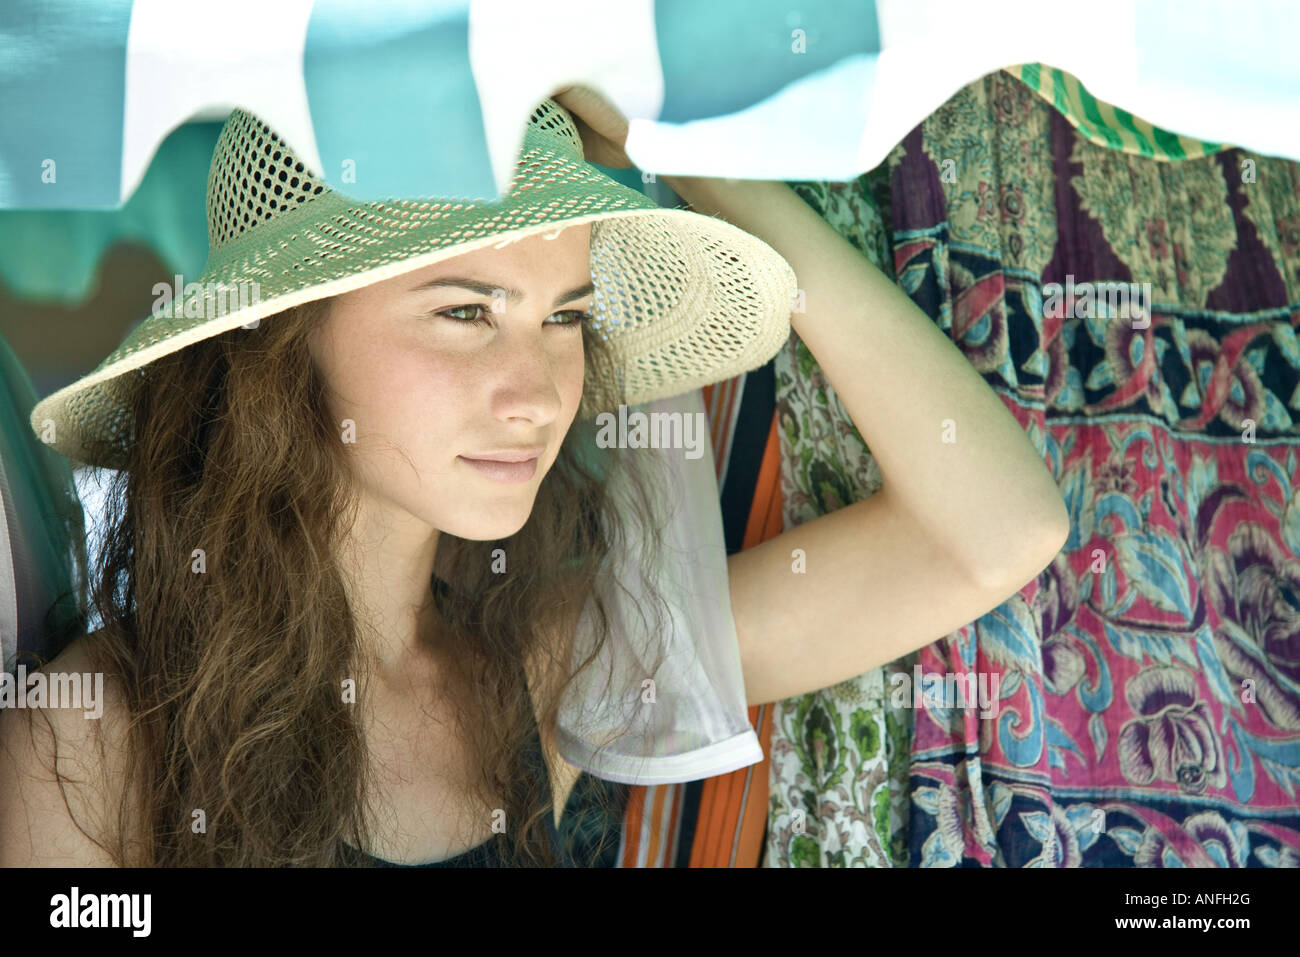 Young woman wearing straw hat, looking away Stock Photo